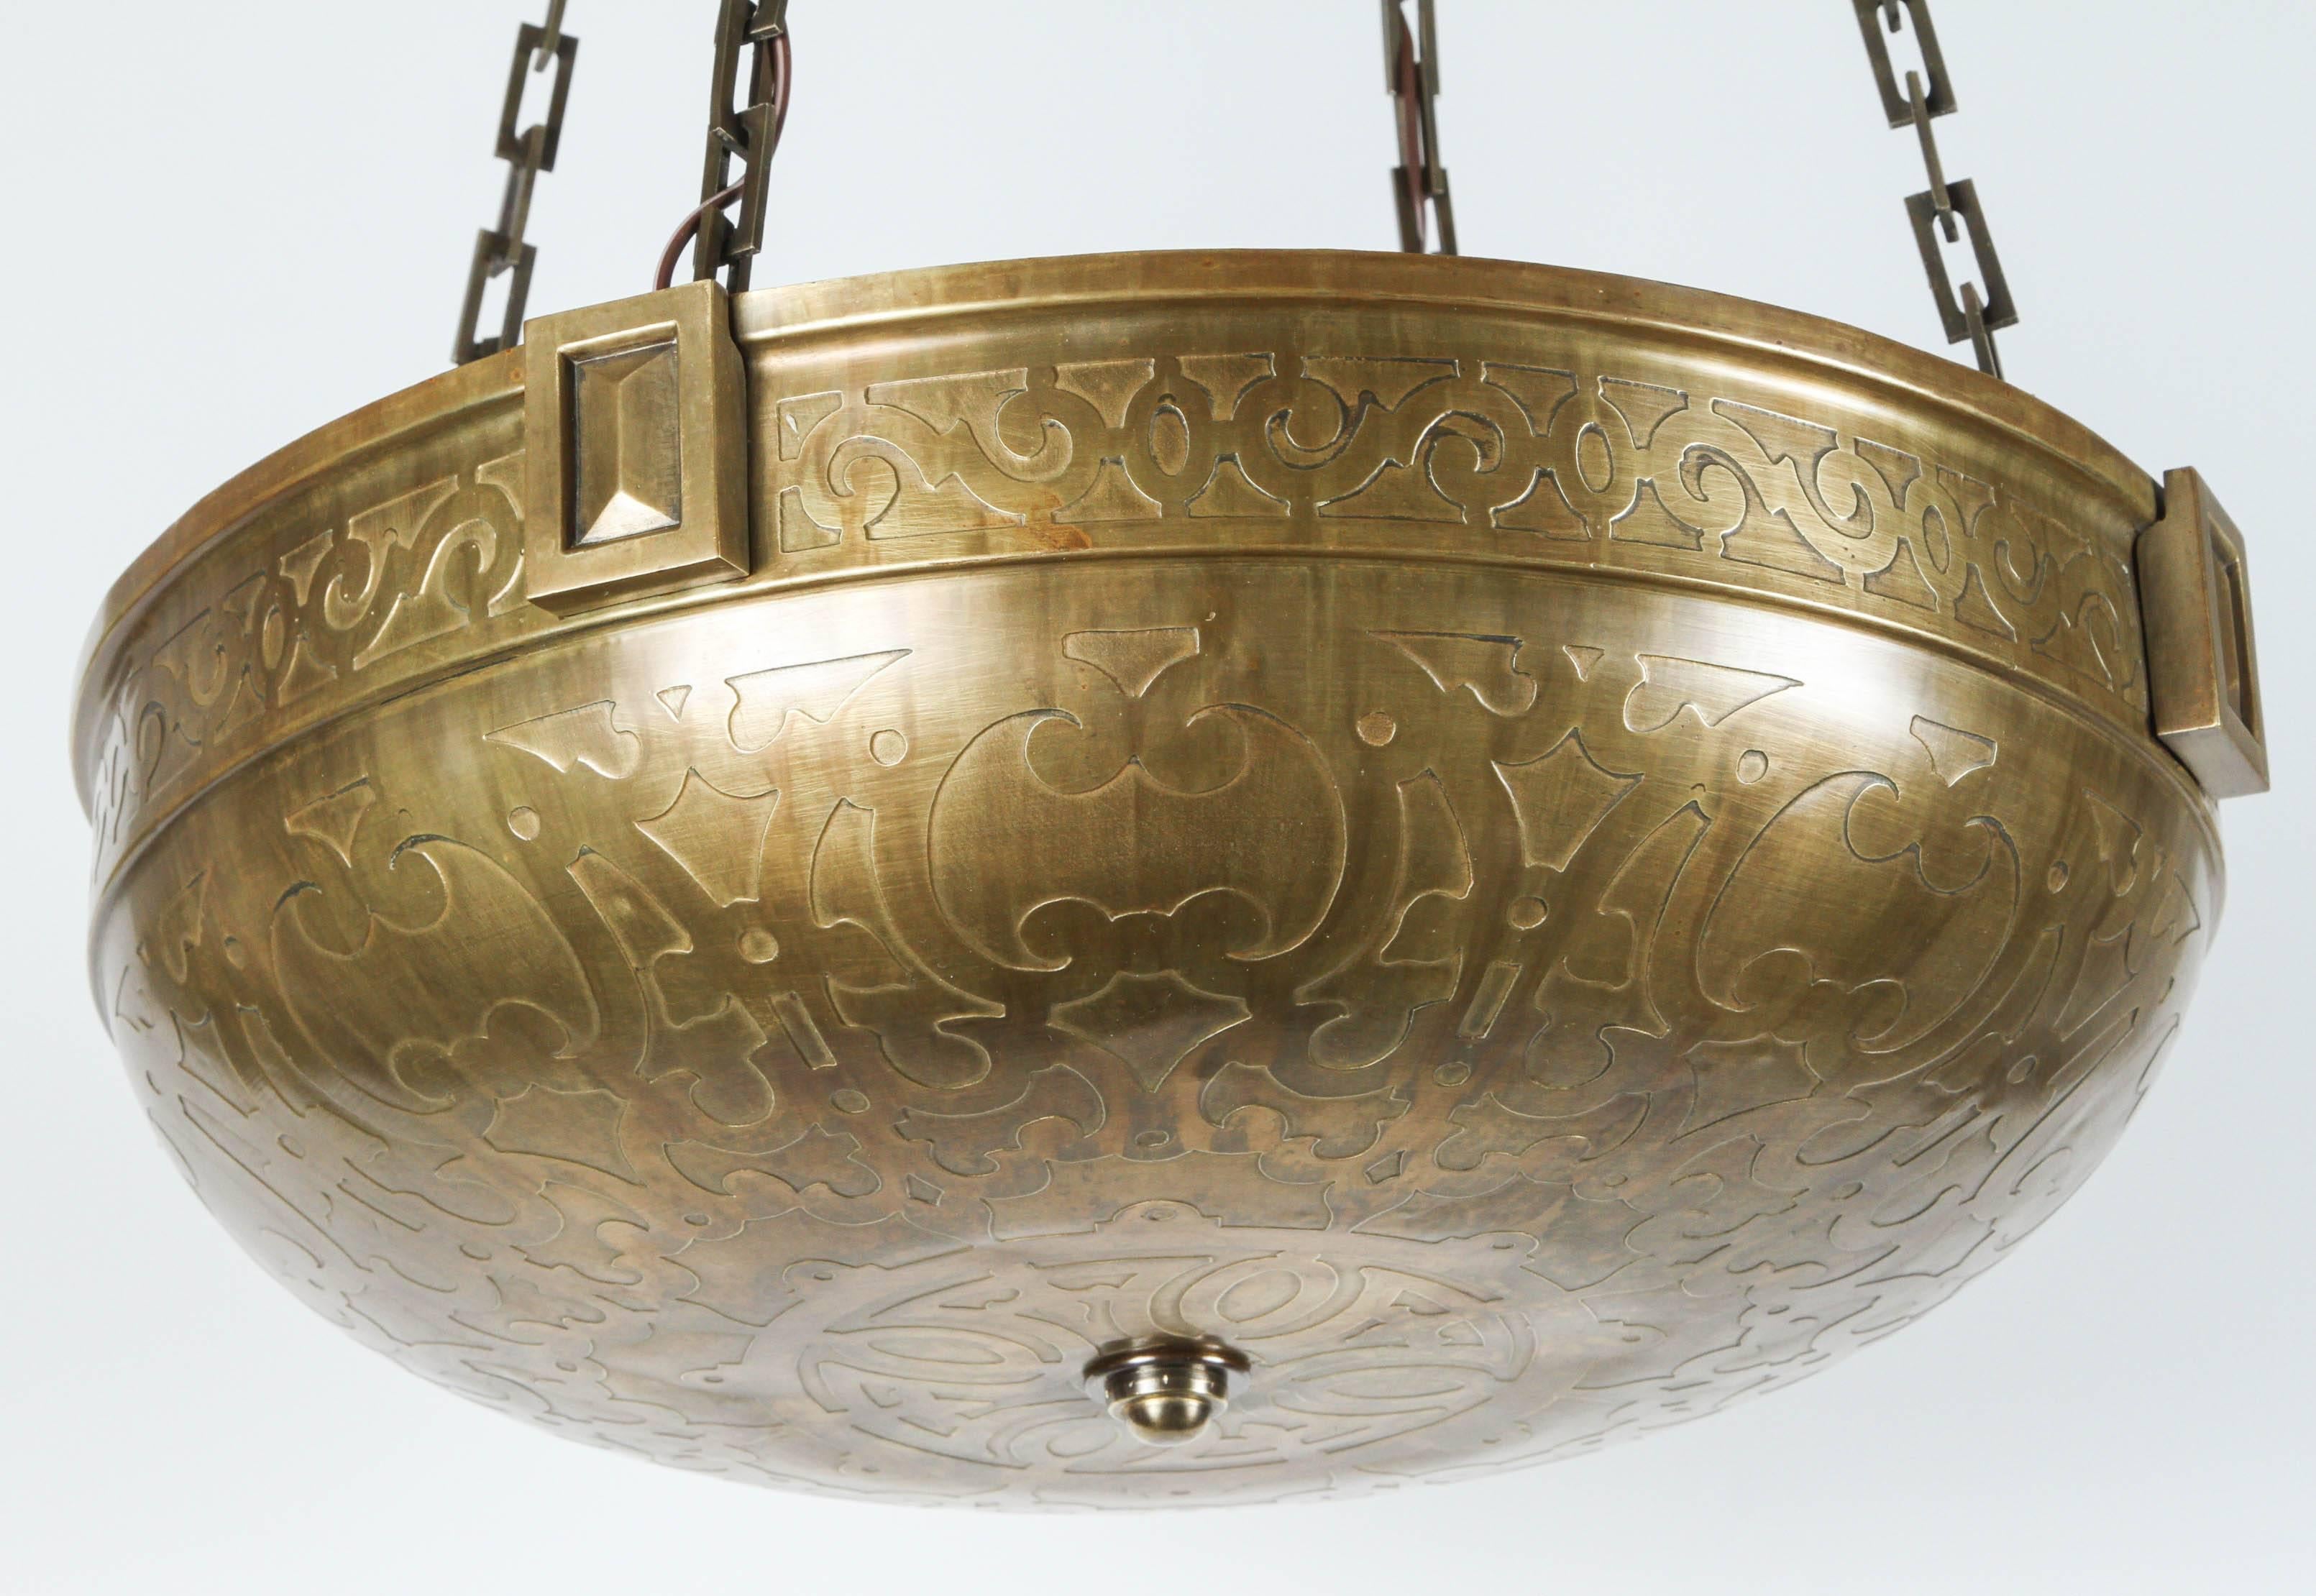 A larger Moorish-style early 20th century acid-etched brass bowl fixture. Exceptional quality. Measures 19.5in diameter.  New electrical up-lit four (4) Edison base, new chain and canopy. Total drop height is 43 inches.
   